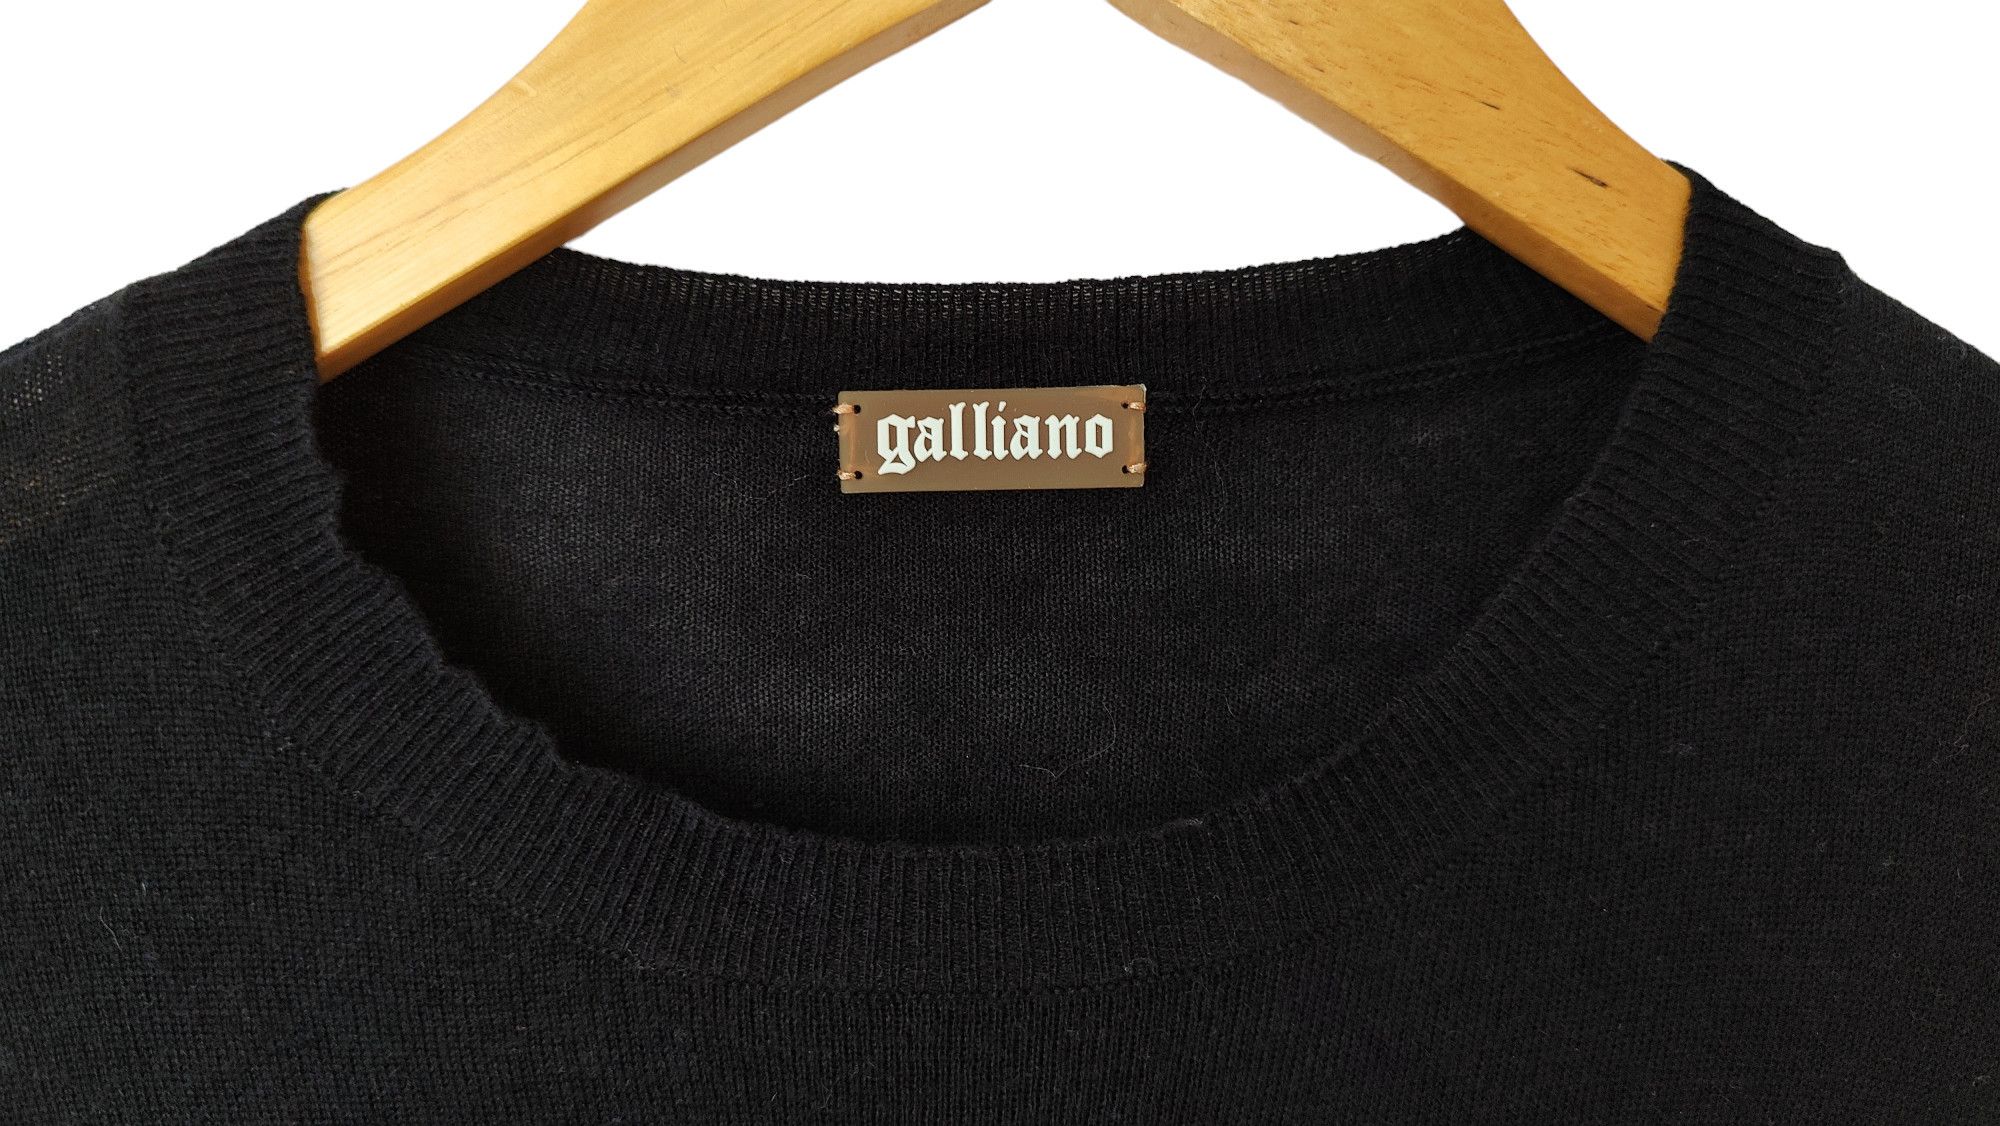 Archival Clothing John Galliano Archival 2011 Black Wool Knitted Sweater Size US S / EU 44-46 / 1 - 2 Preview